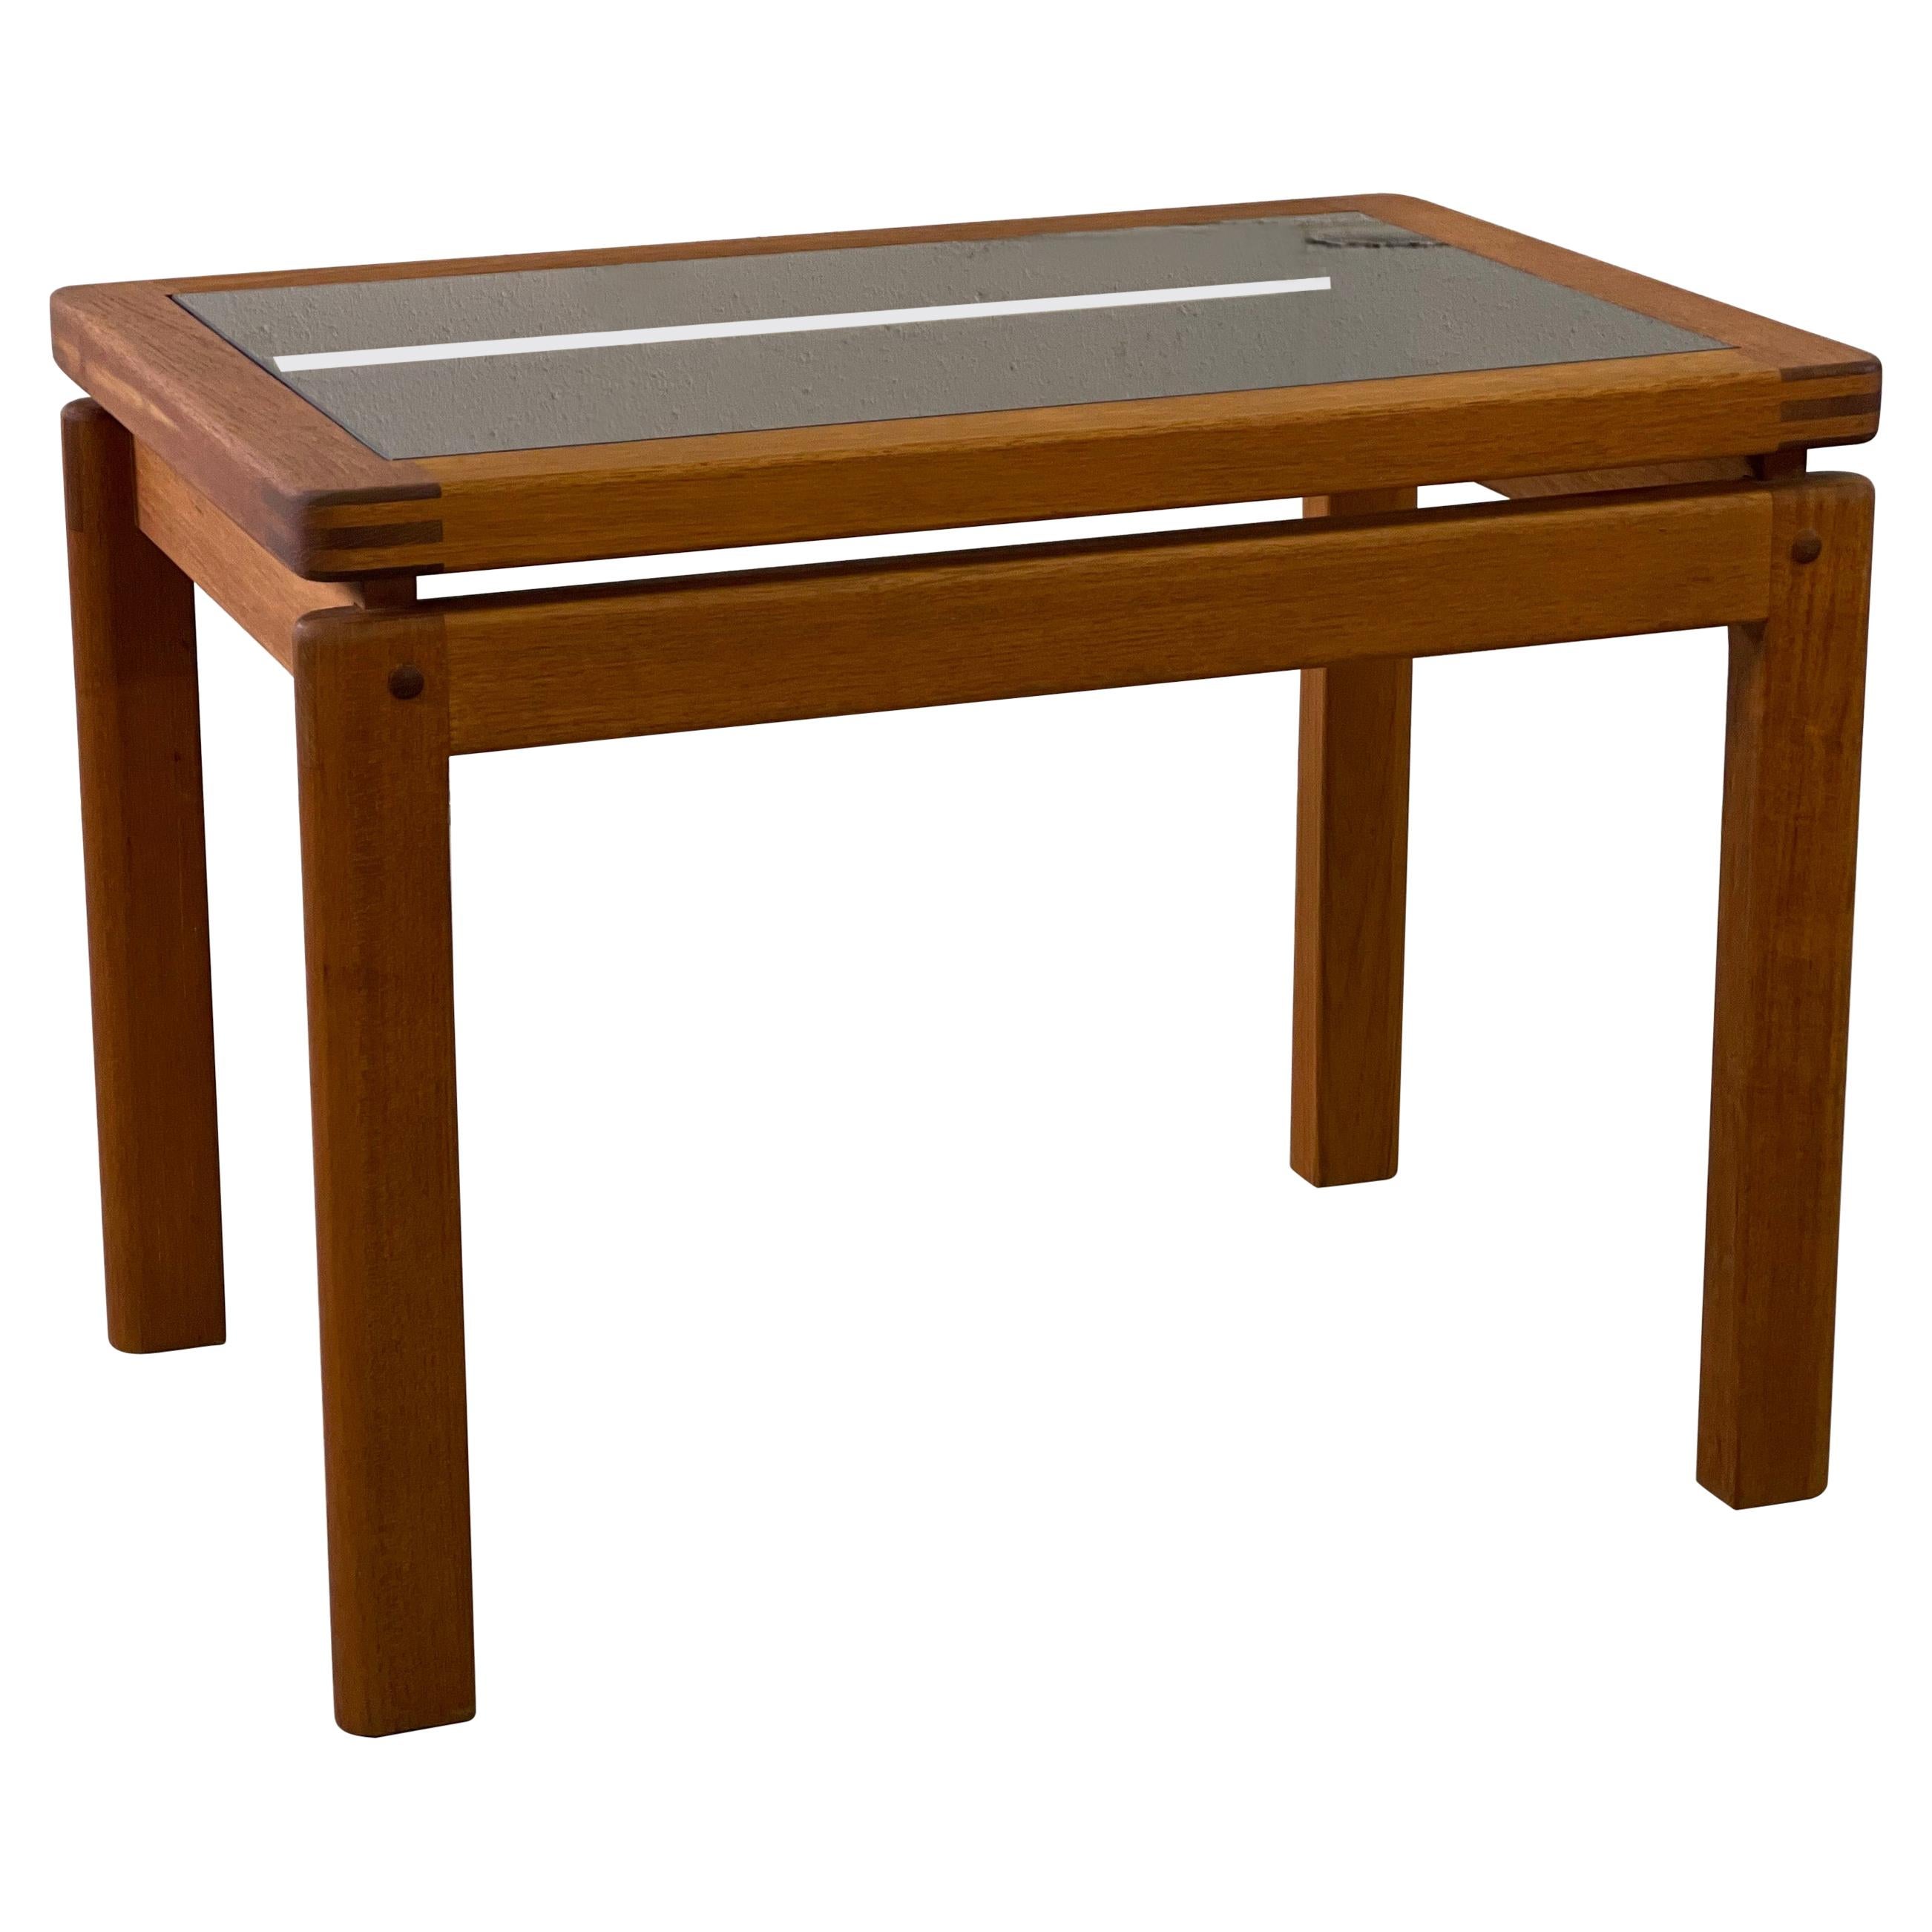 1970s Danish Teak Side Table Smoked Glass Top For Sale